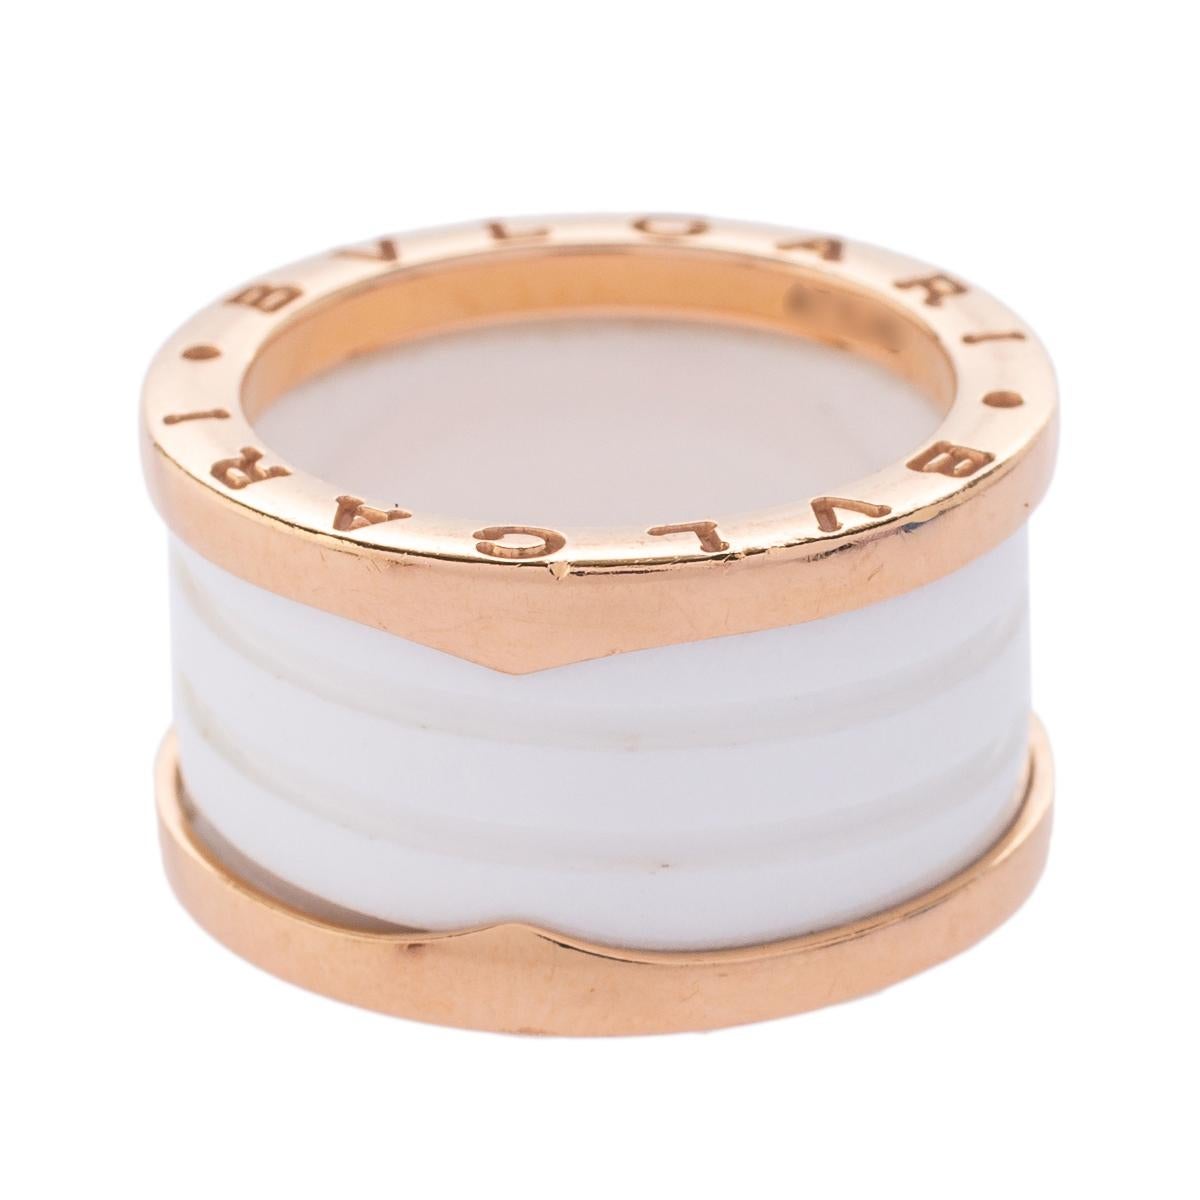 For the woman who has a refined taste in fine jewelry, Bvlgari brings her this immaculately crafted ring. Sculpted from 18k rose gold, this Bvlgari B.Zero1 ring features white ceramic bands stacked together. It is complete with signature